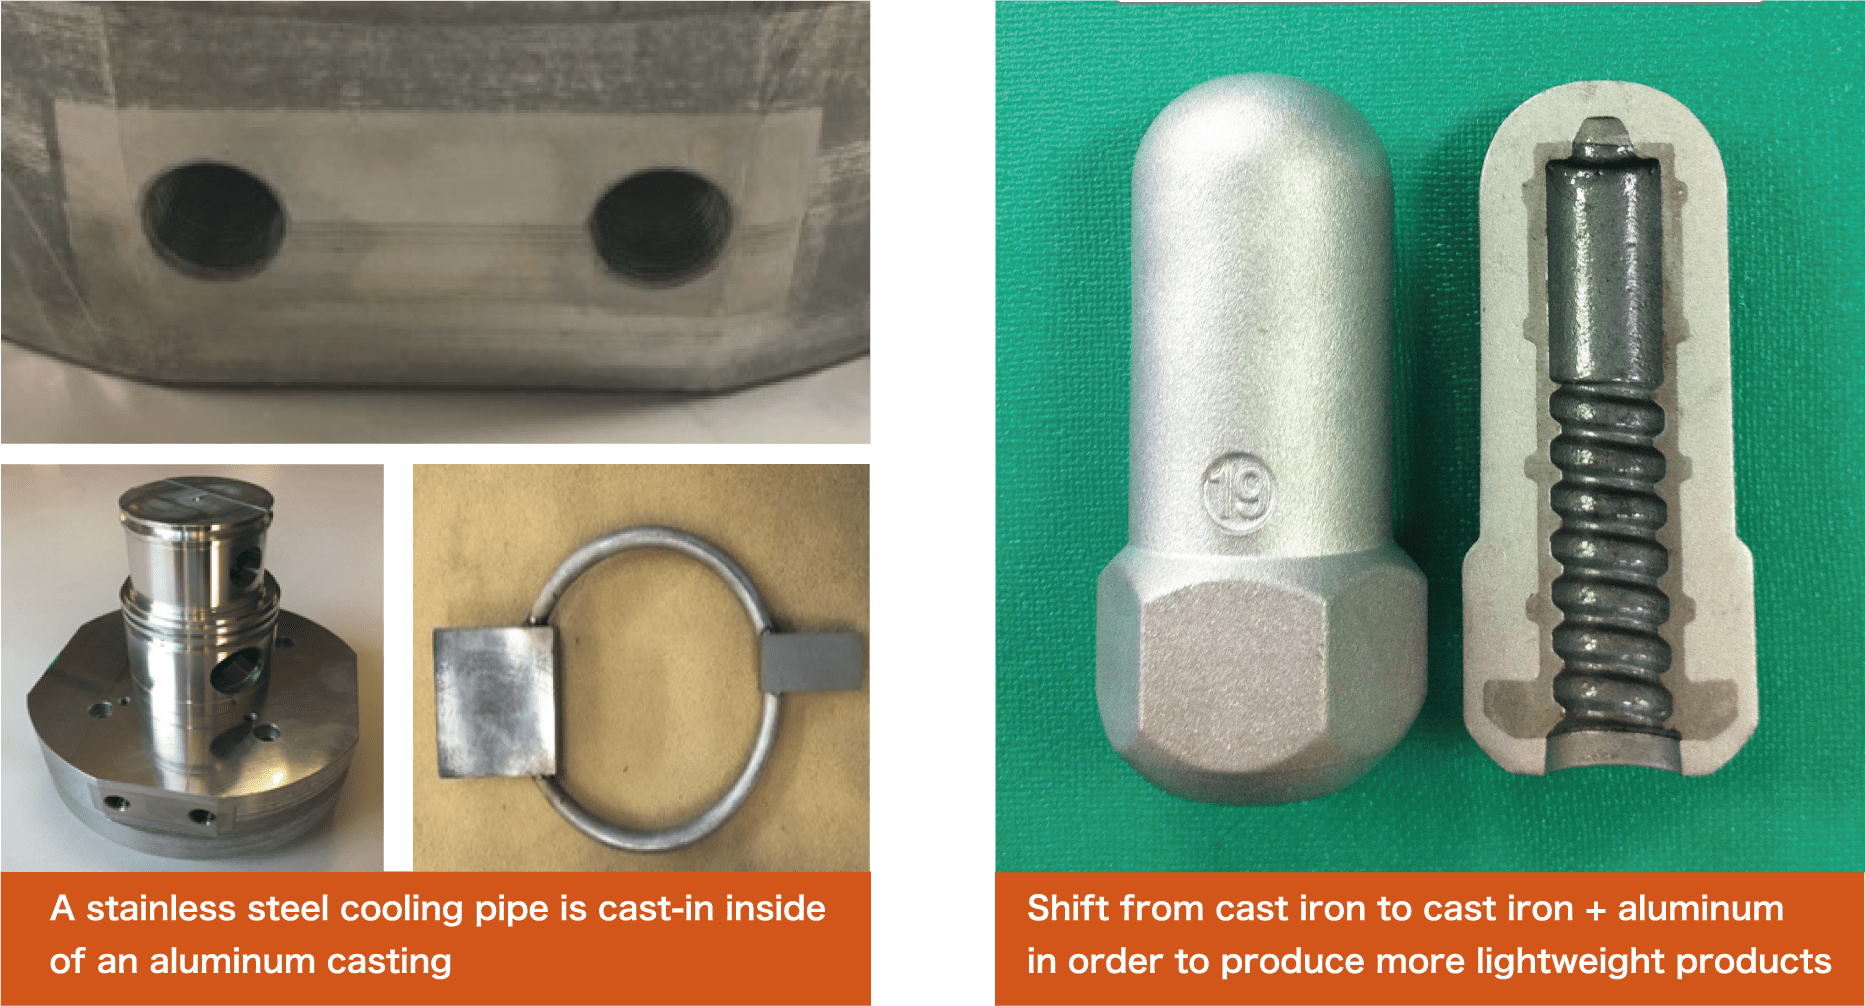 A stainless steel cooling pipe is cast-in inside of an aluminum casting